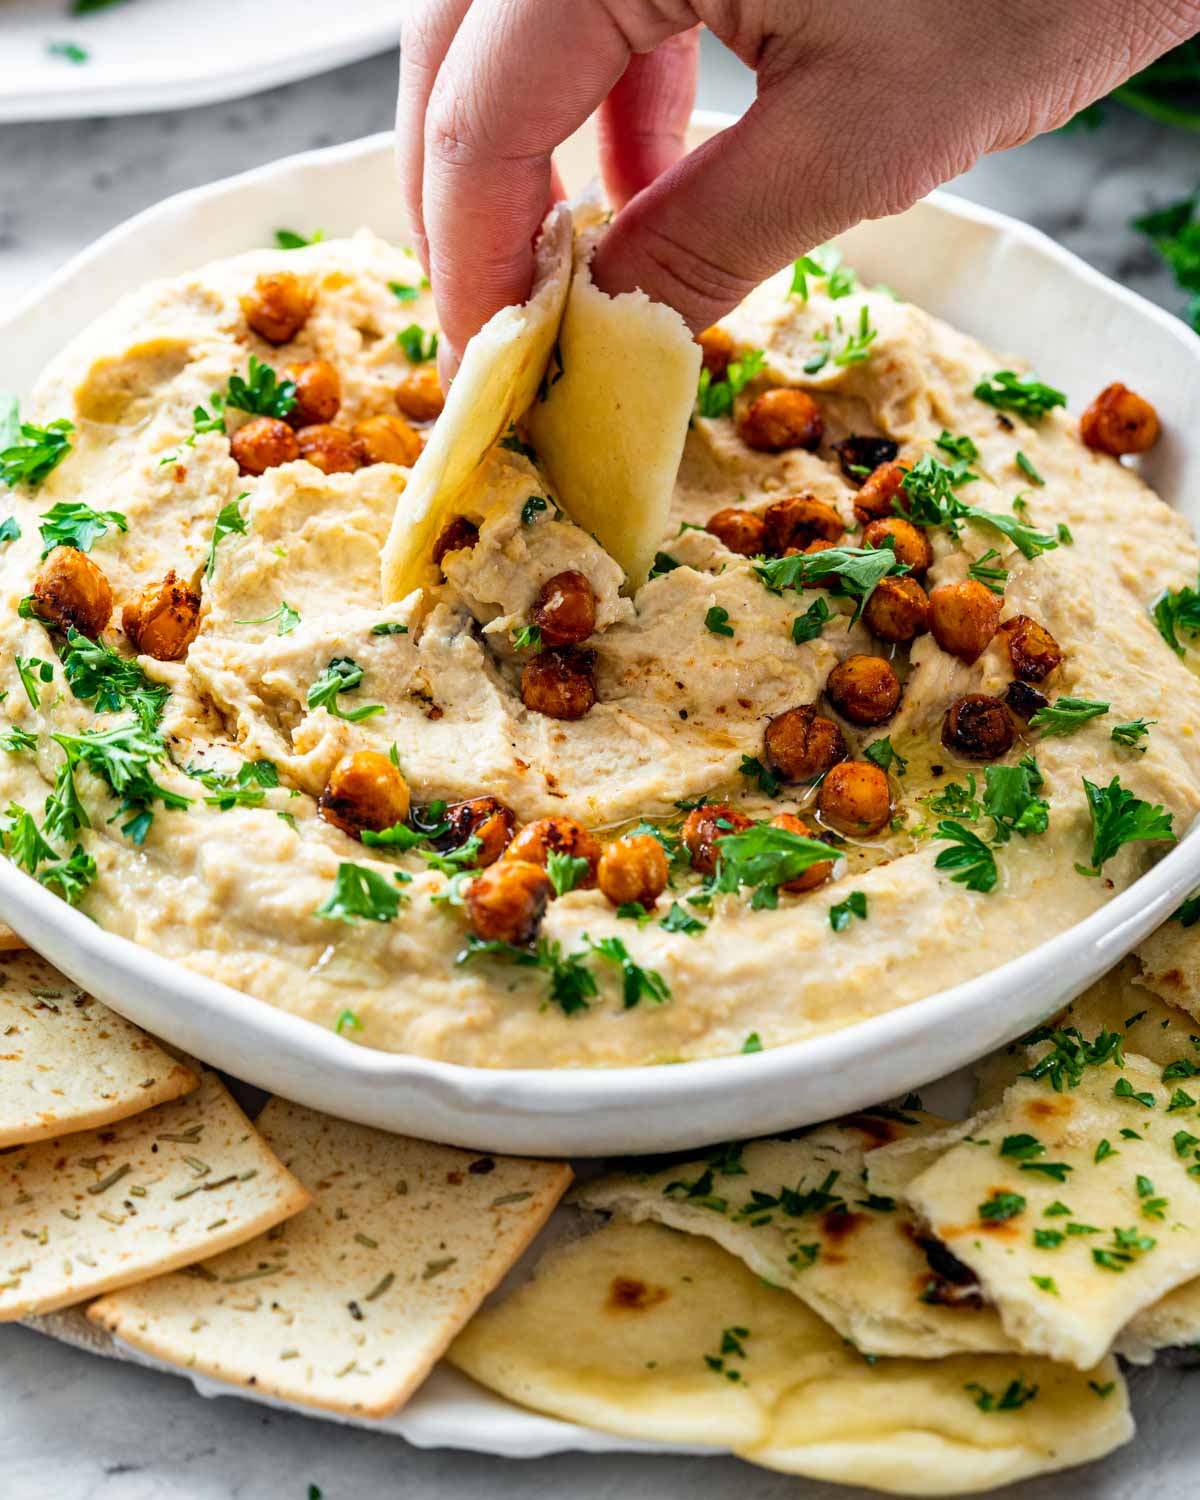 a hand dipping a piece of naan in homemade hummus.